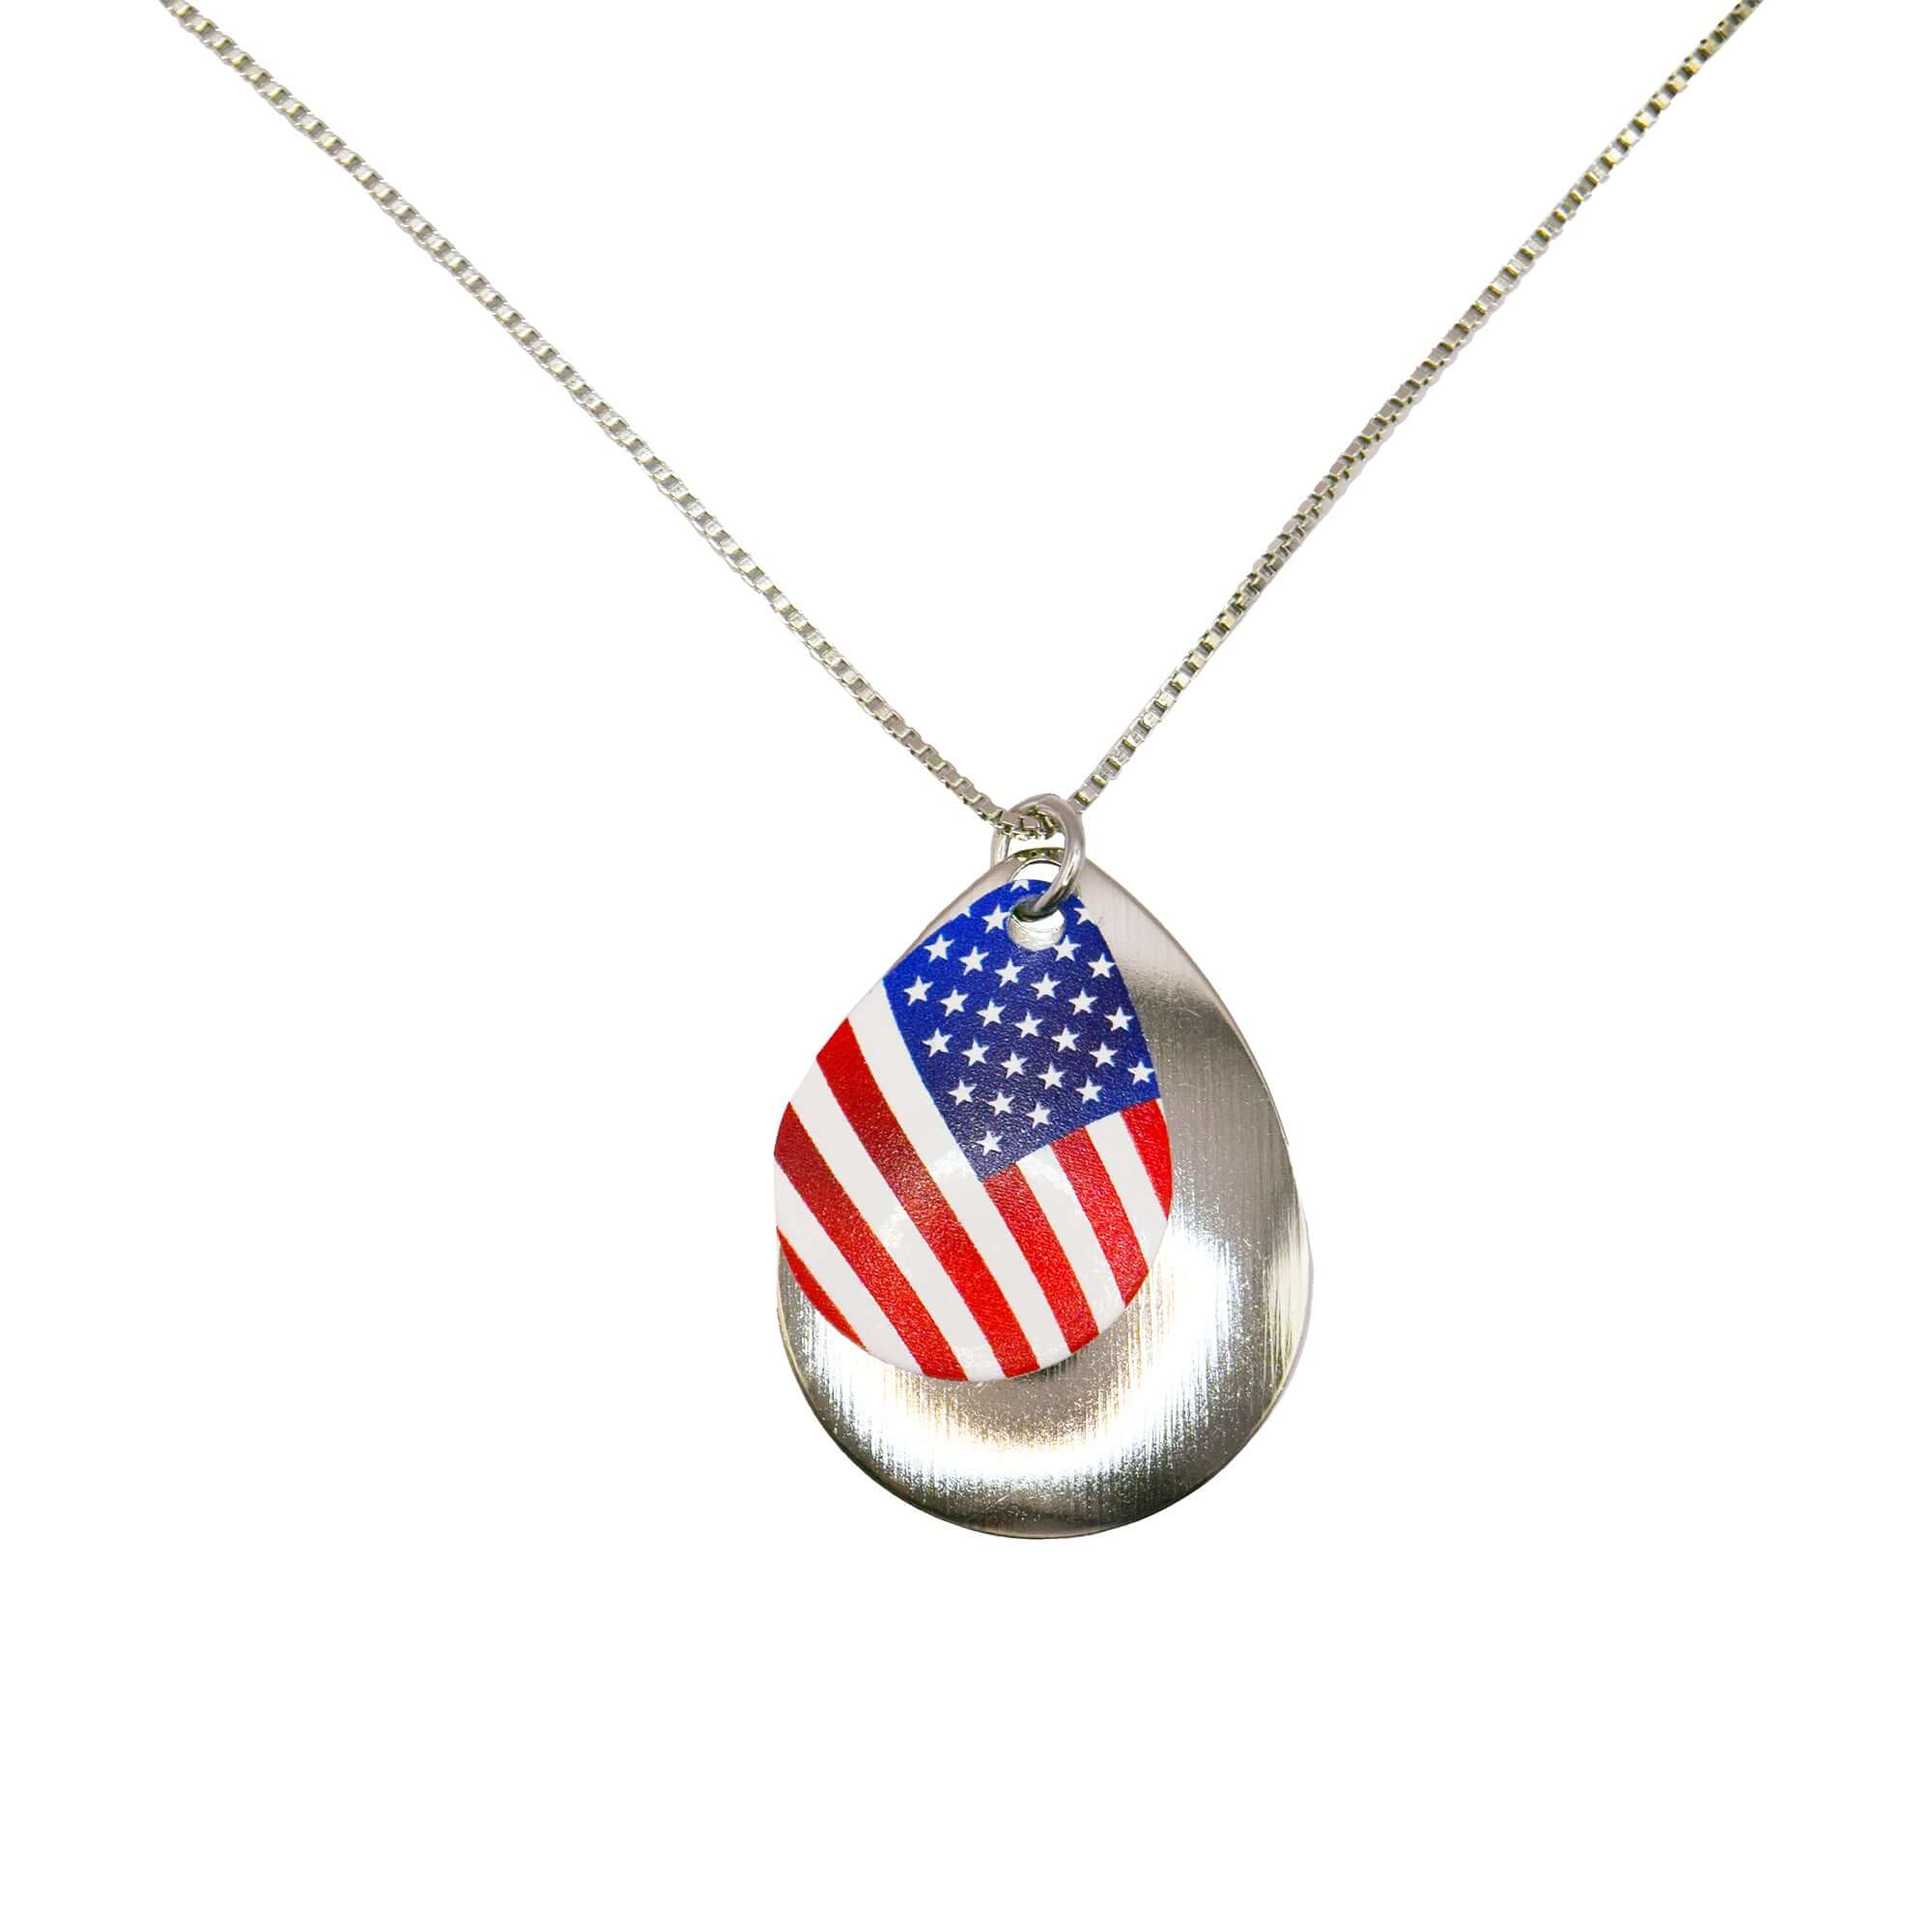 Made in USA Necklace with US Flag Charm